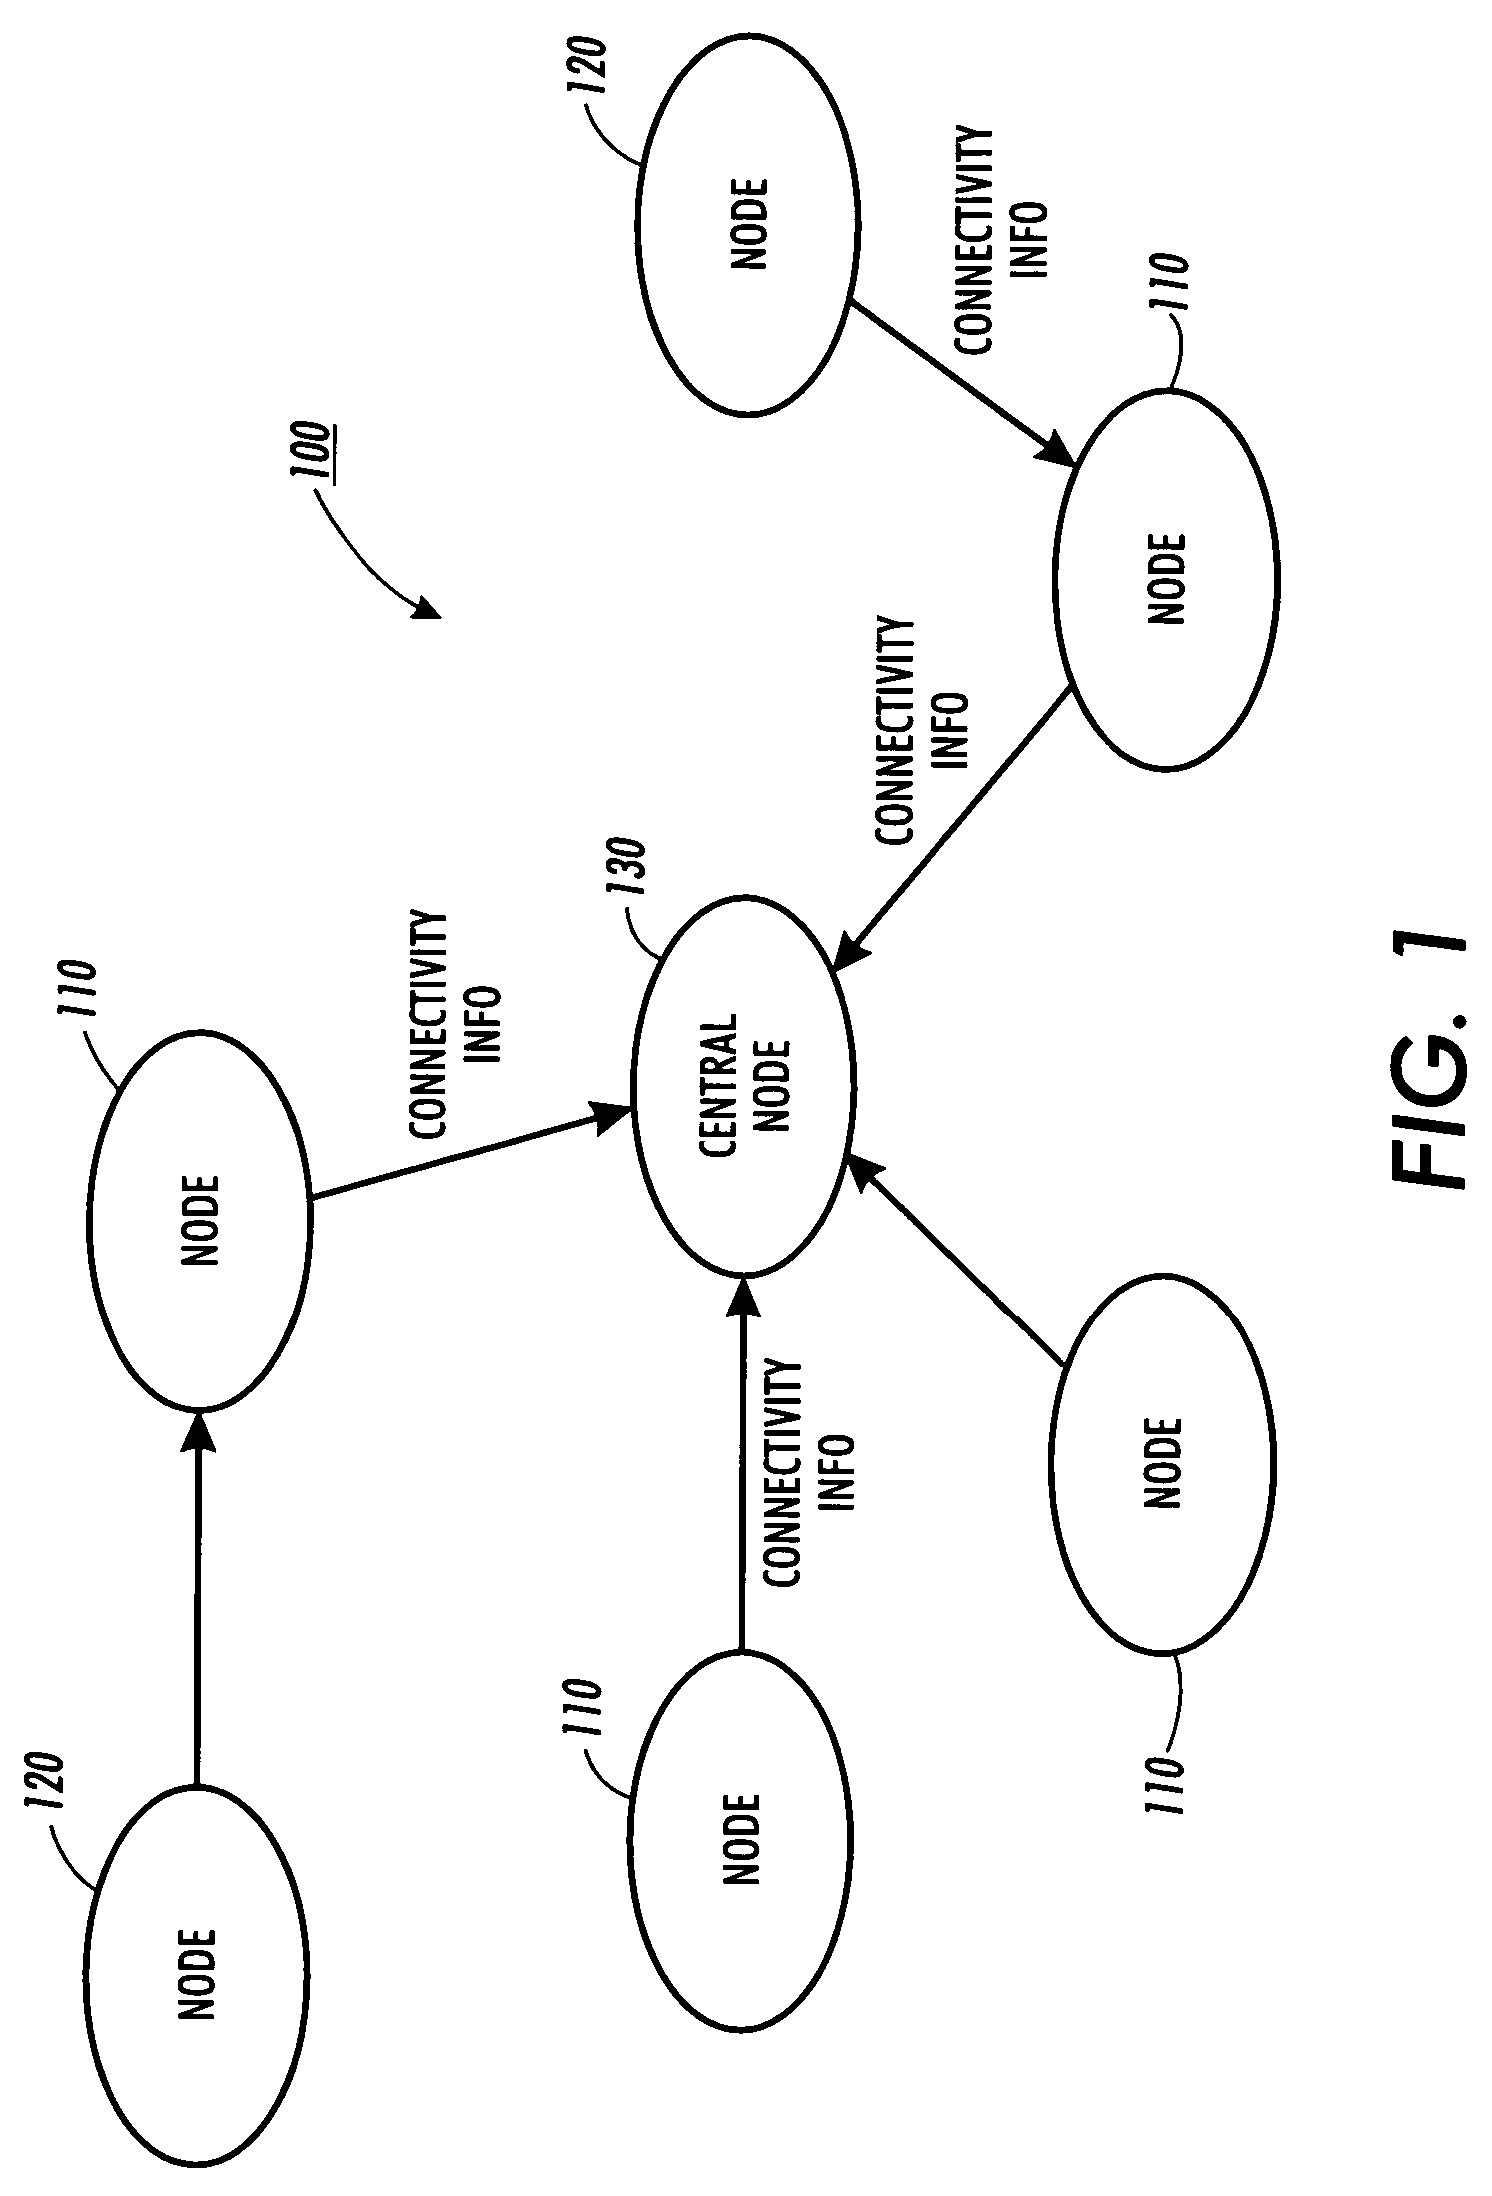 Node localization in communication networks